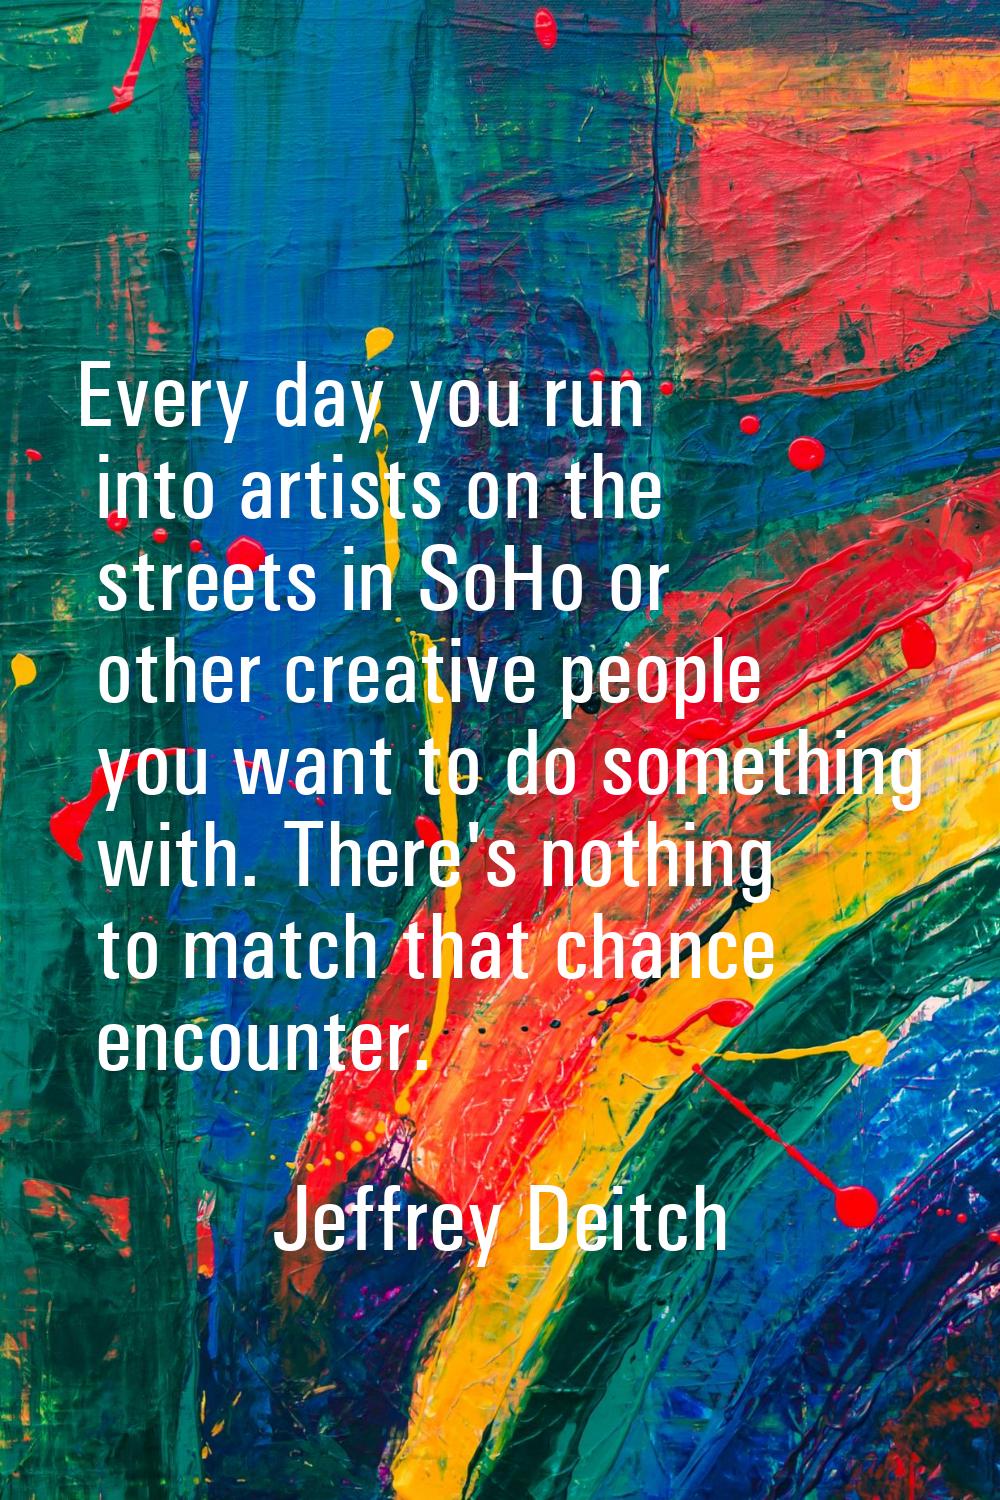 Every day you run into artists on the streets in SoHo or other creative people you want to do somet